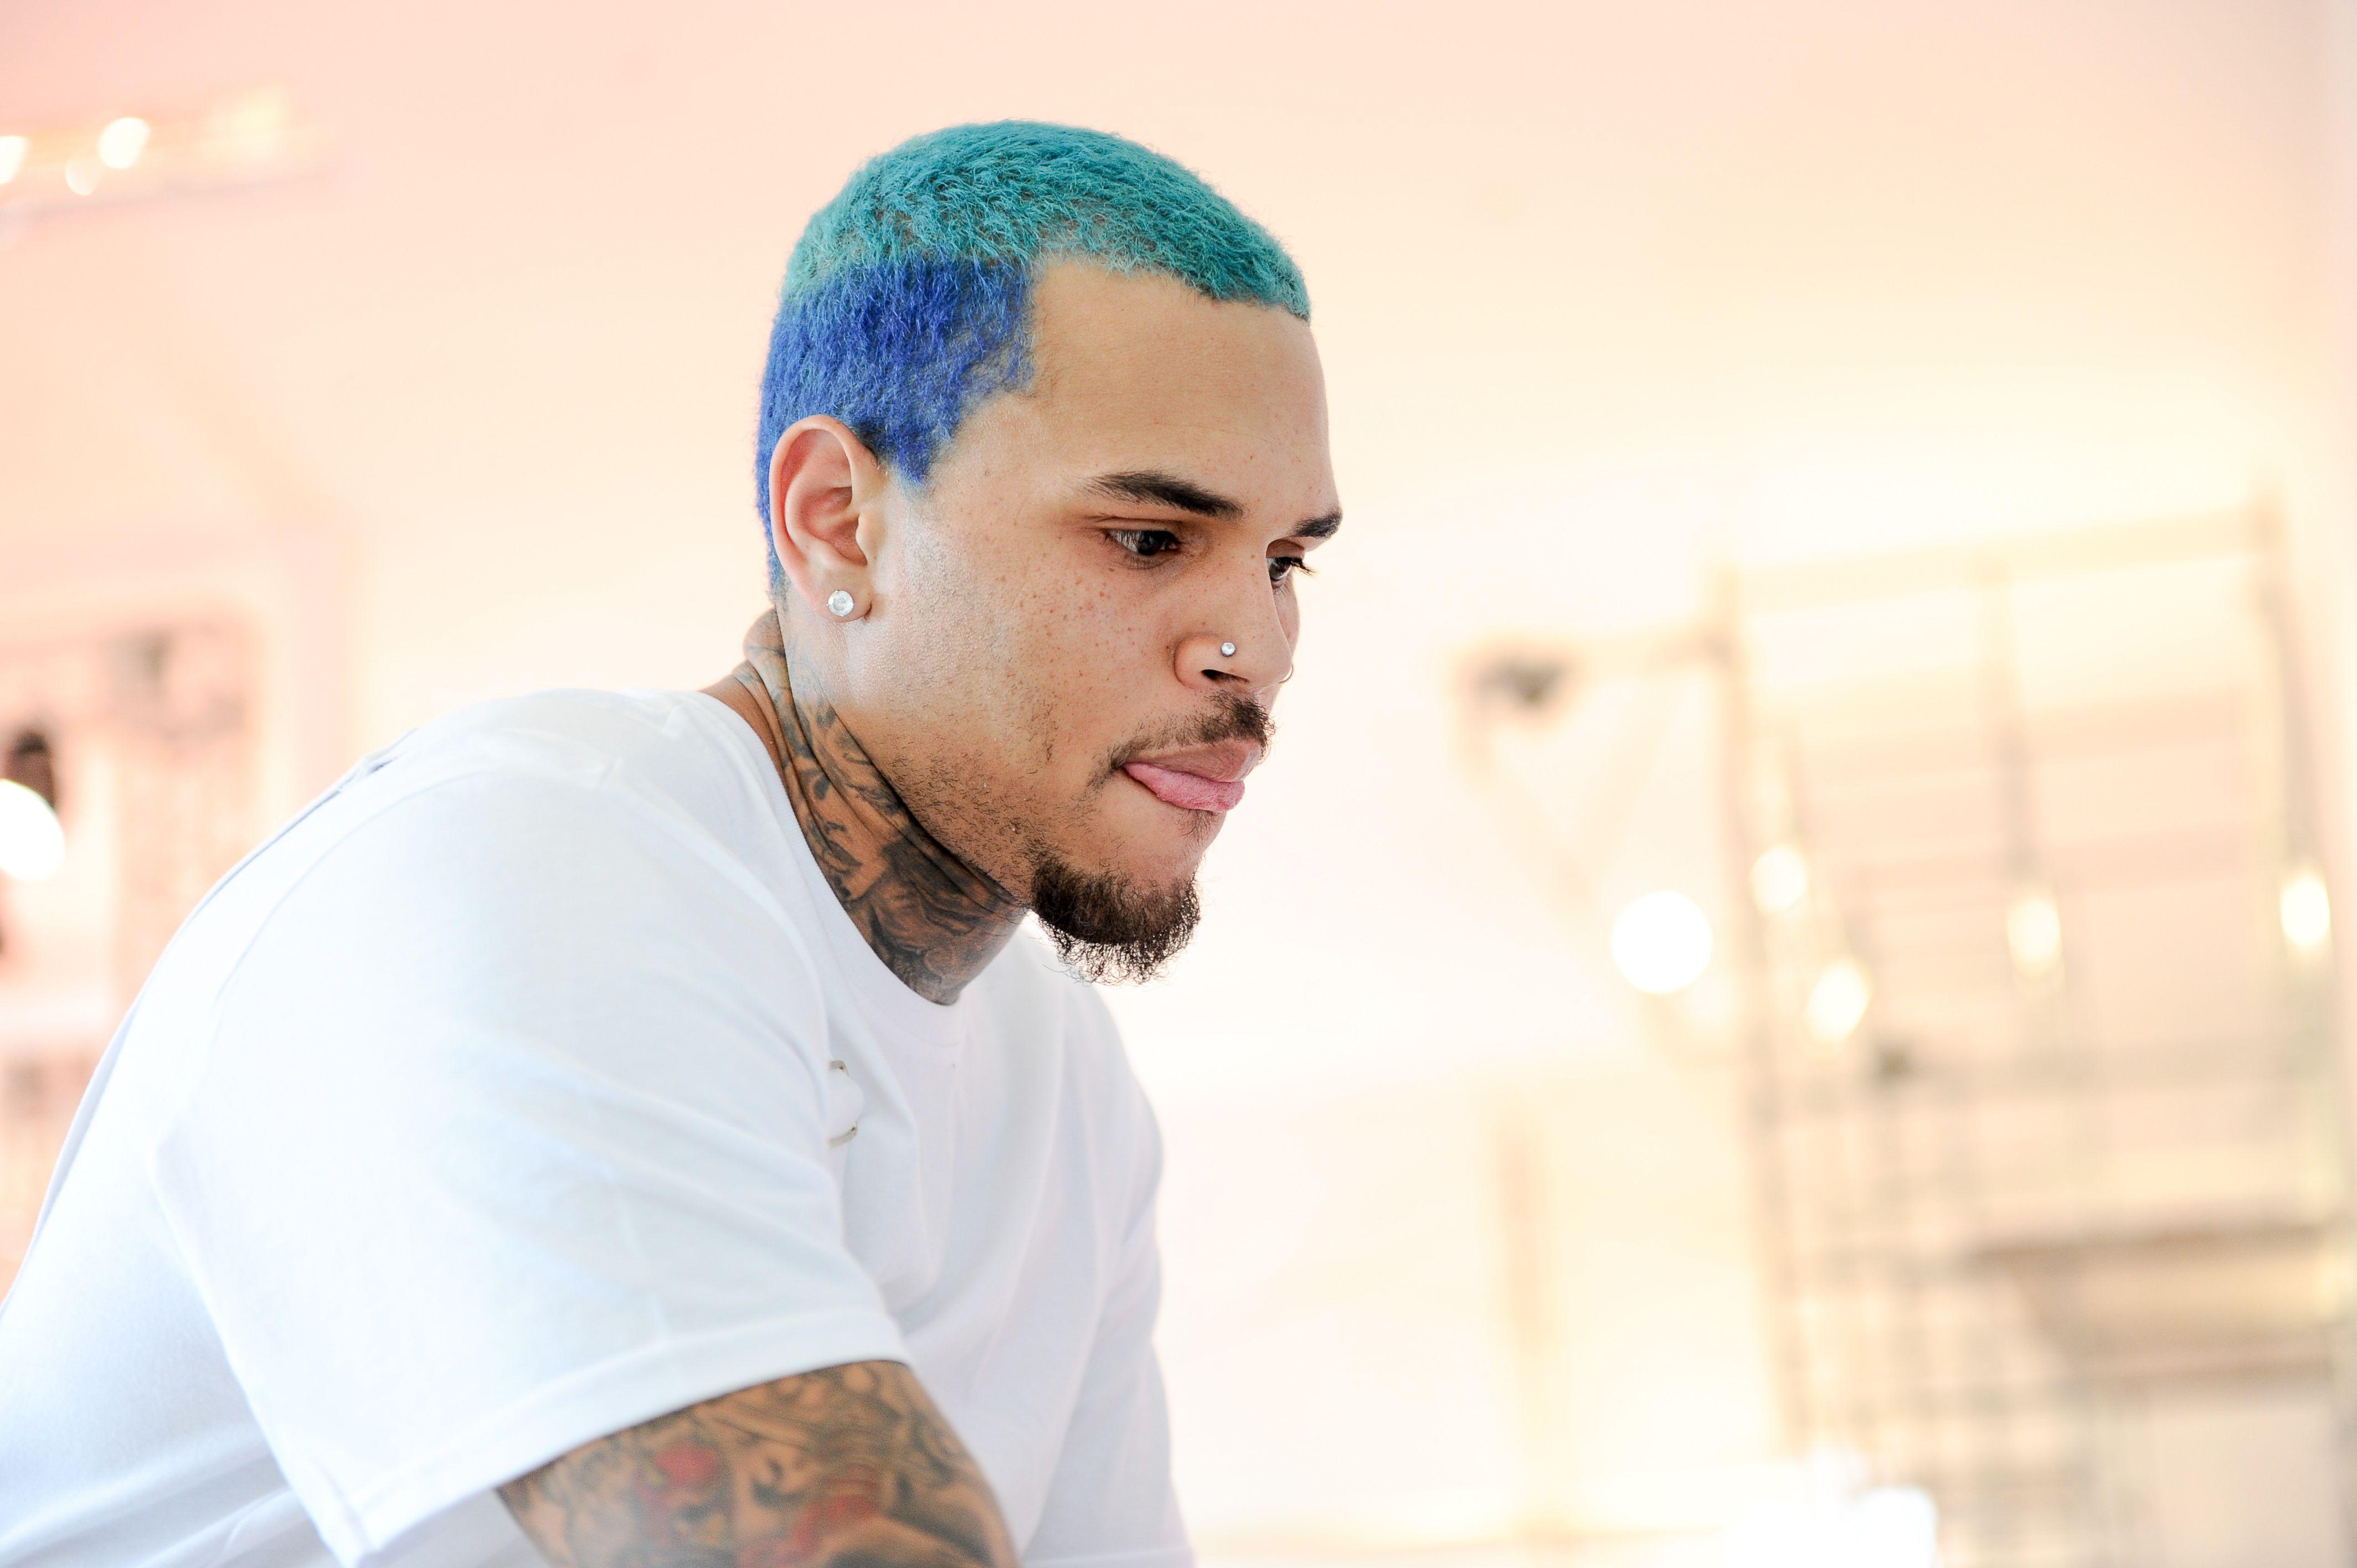 Chris Brown Hairstyle Widescreen Wallpaper 58682 4256x2832 px